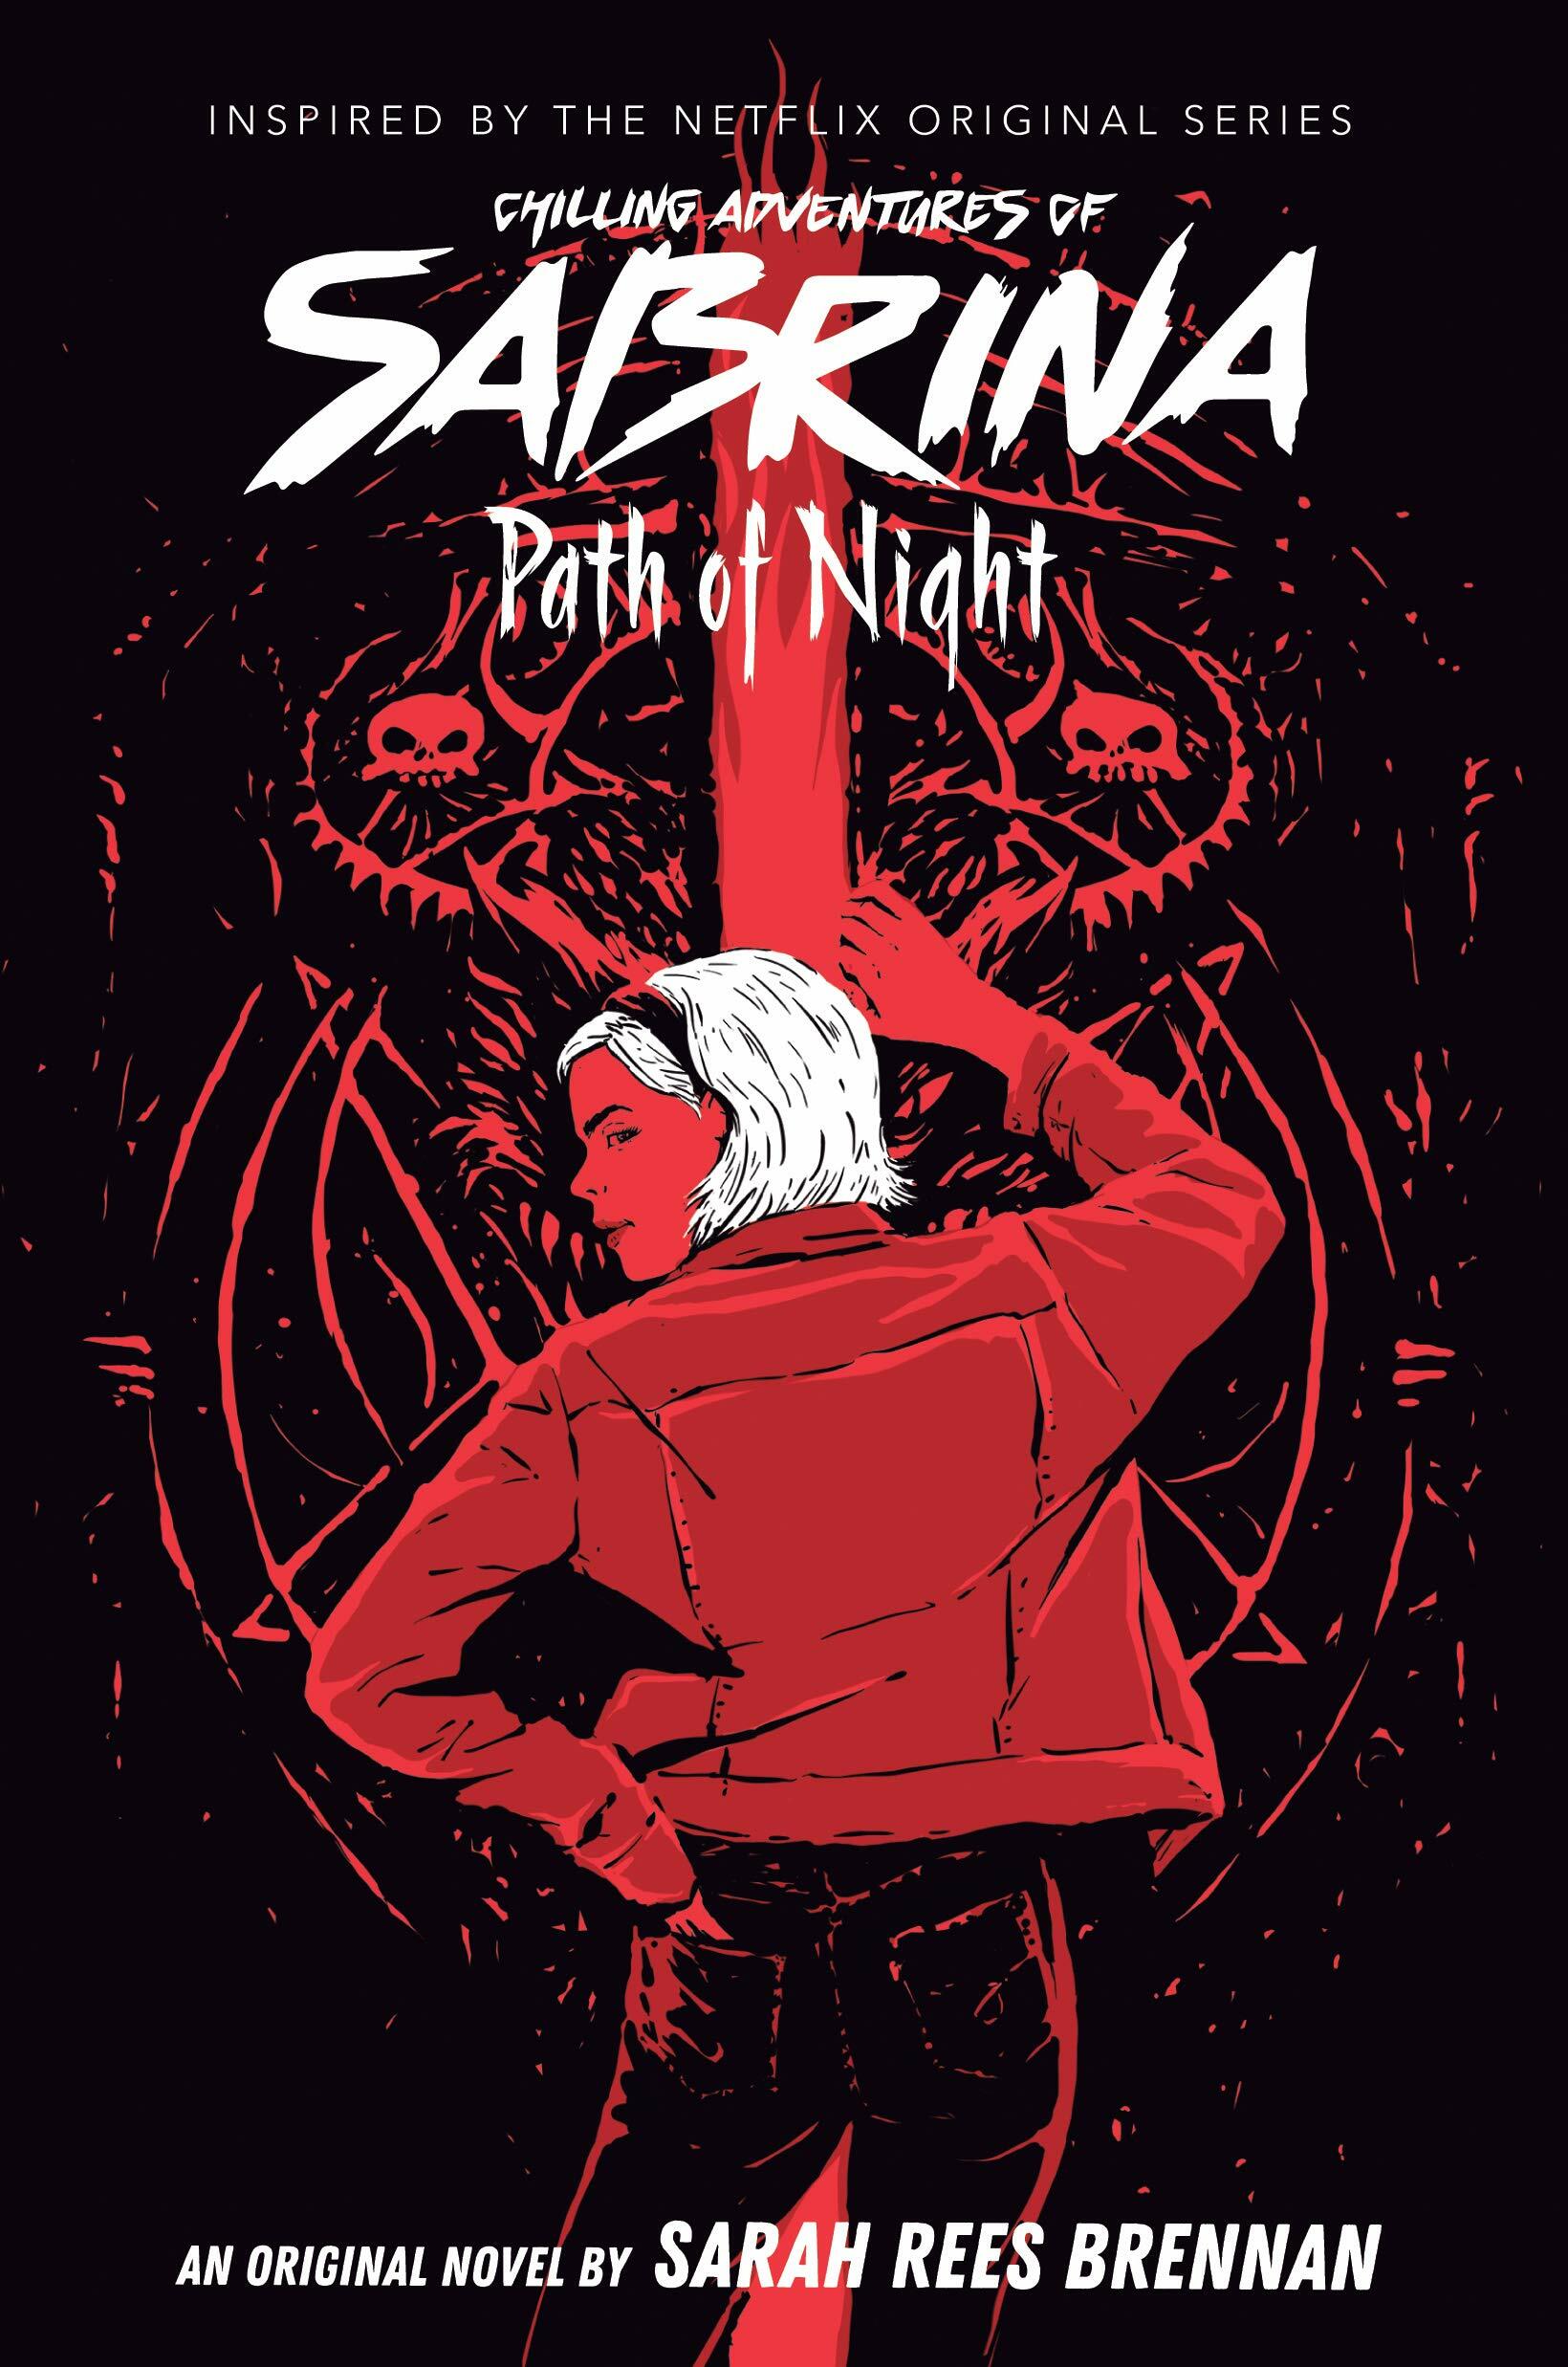 Path of Night (The Chilling Adventures of Sabrina Novel #3) (Paperback)